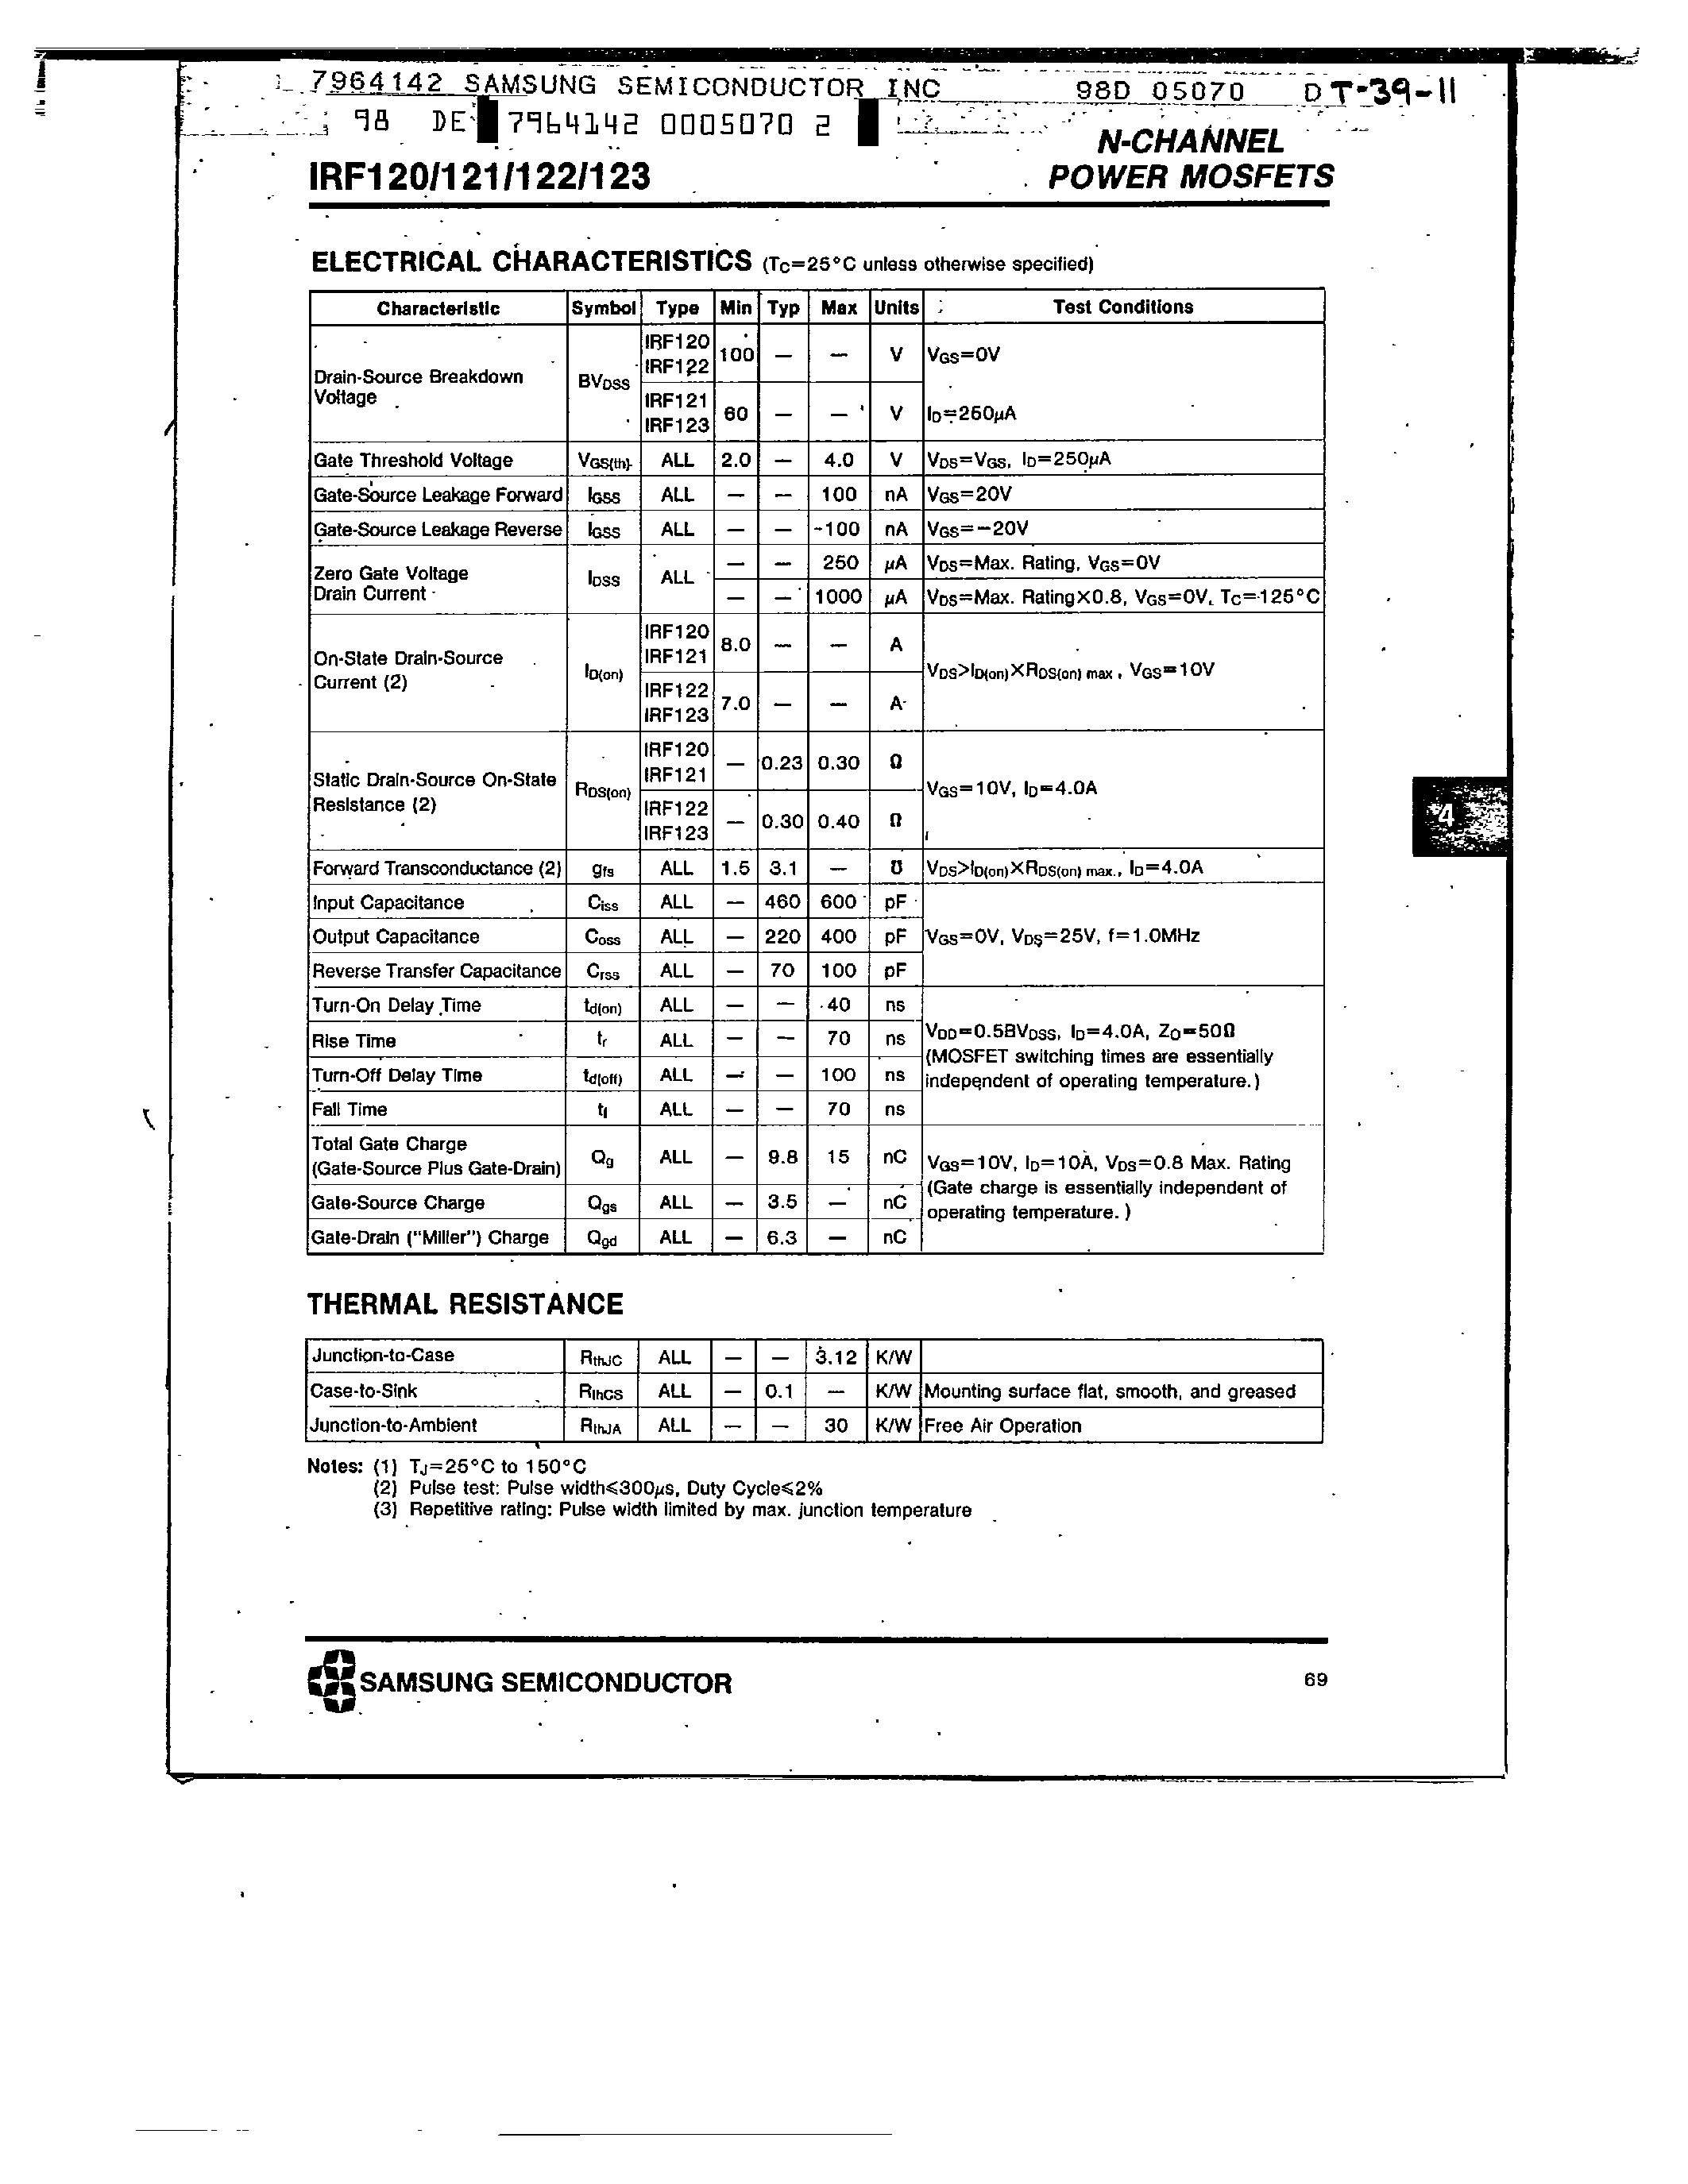 Datasheet IRF122 - N-CHANNEL POWER MOSFETS page 2